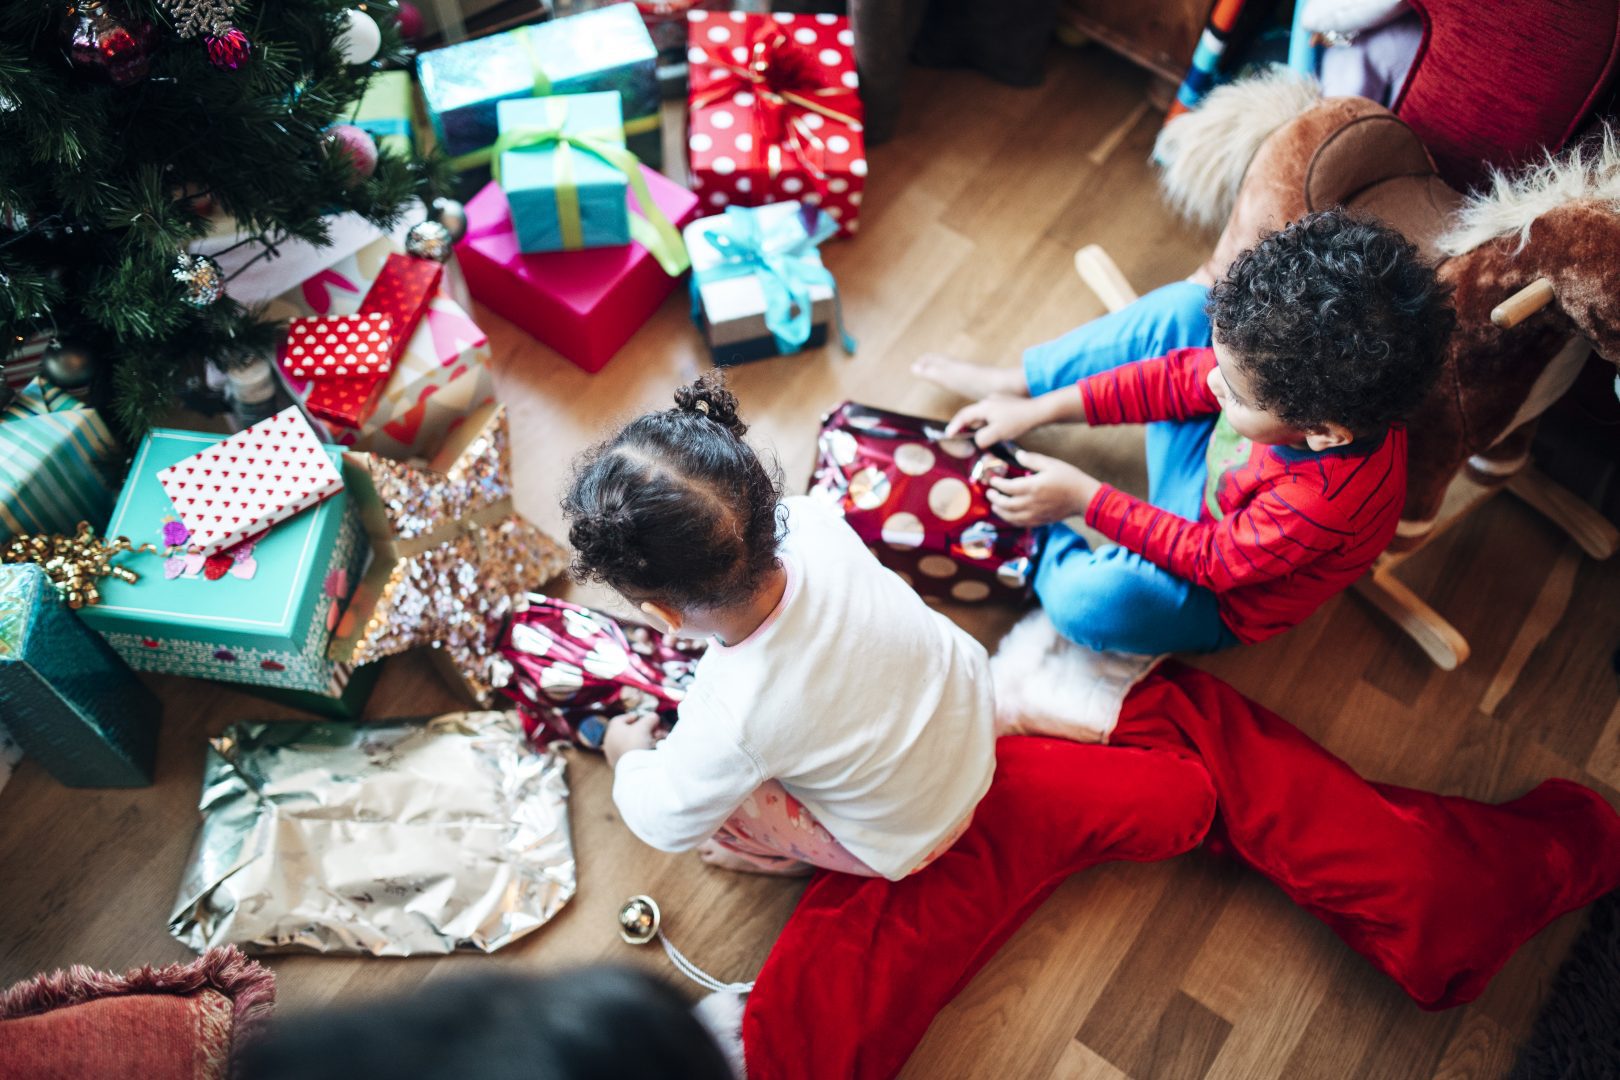 birds eye view of two children sitting on the floor opening colorful presents in front of a christmas tree